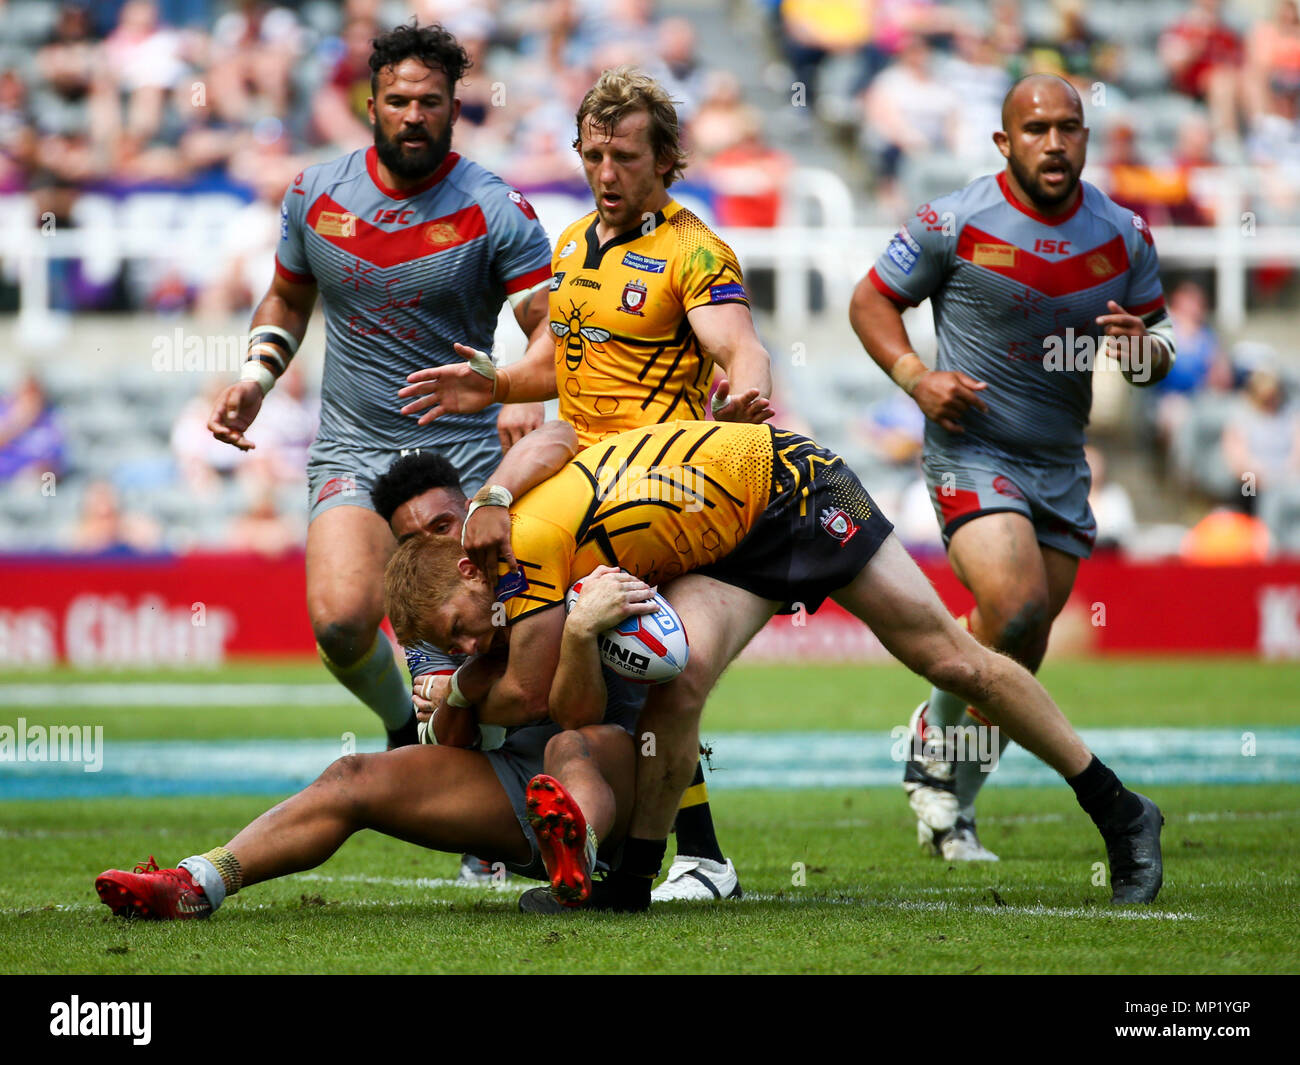 St James Park, Newcastle, UK. 20th May, 2018. Dacia Magic Weekend of Rugby League; Salford Red Devils versus Catalan Dragons; Kris Welham of Salford Red Devils is injured as Jodie Broughton of Catalan Dragons tackles him Credit: Action Plus Sports/Alamy Live News Stock Photo